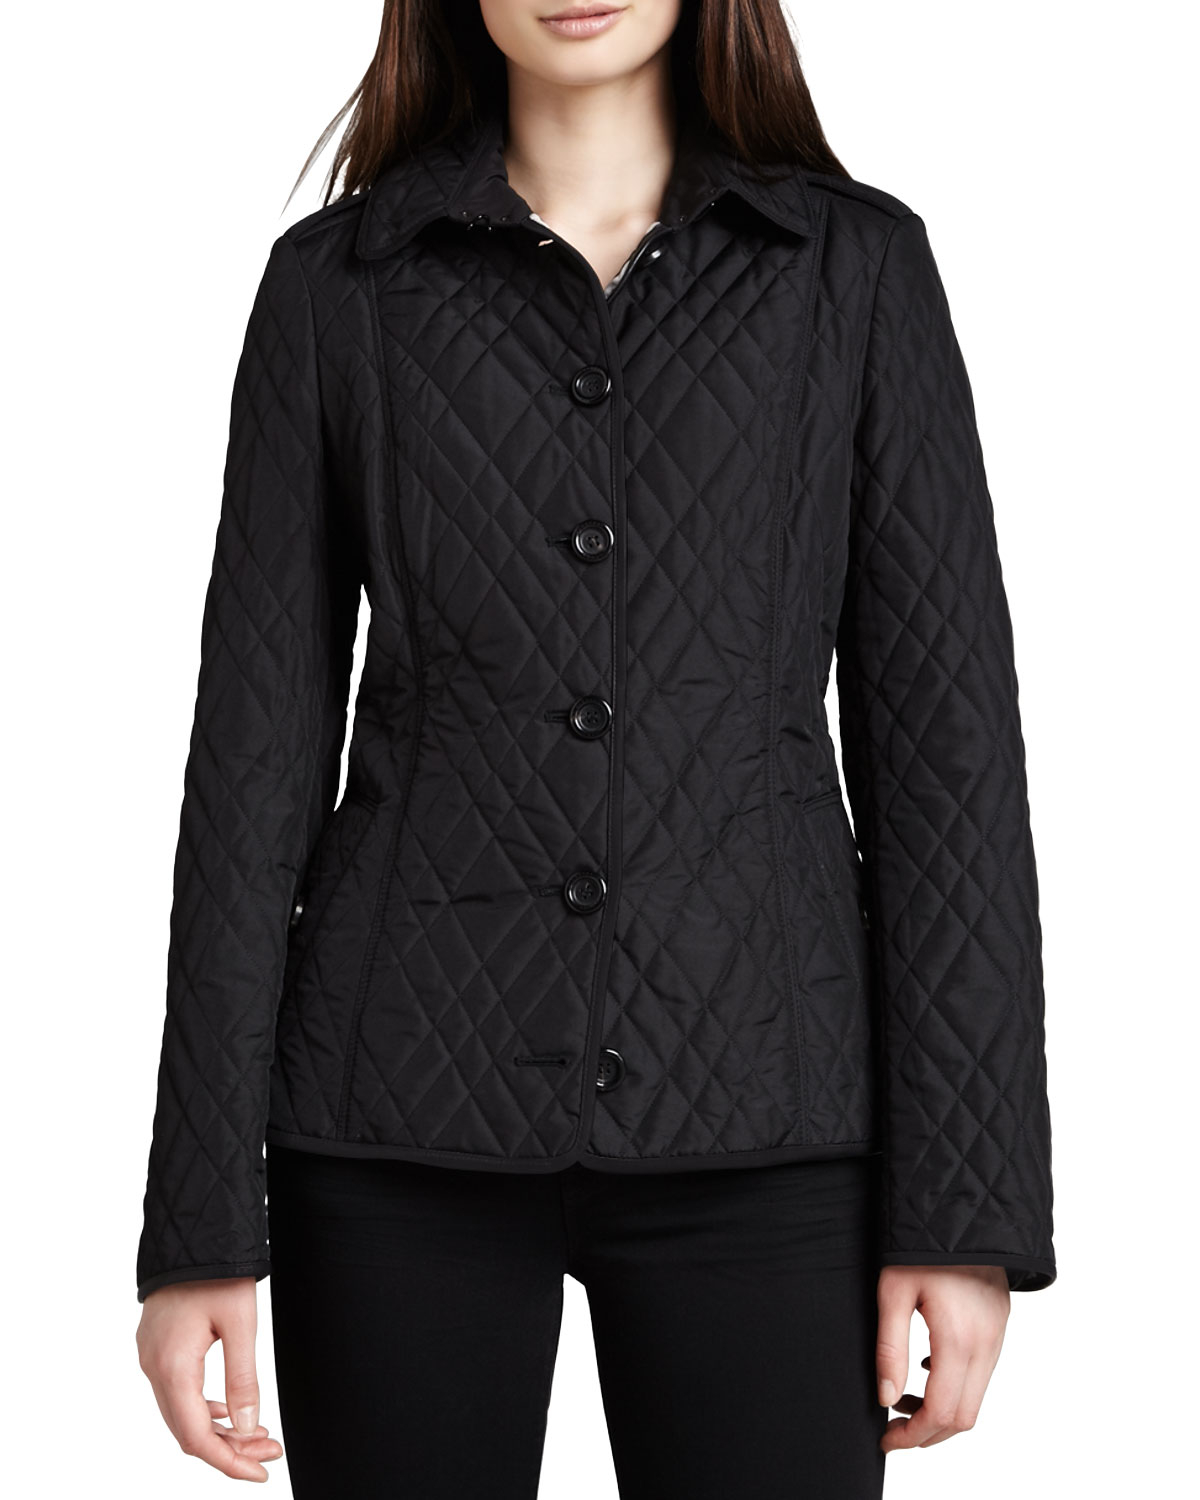 Lyst - Burberry Ashurst Check-lined Quilted Jacket in Black